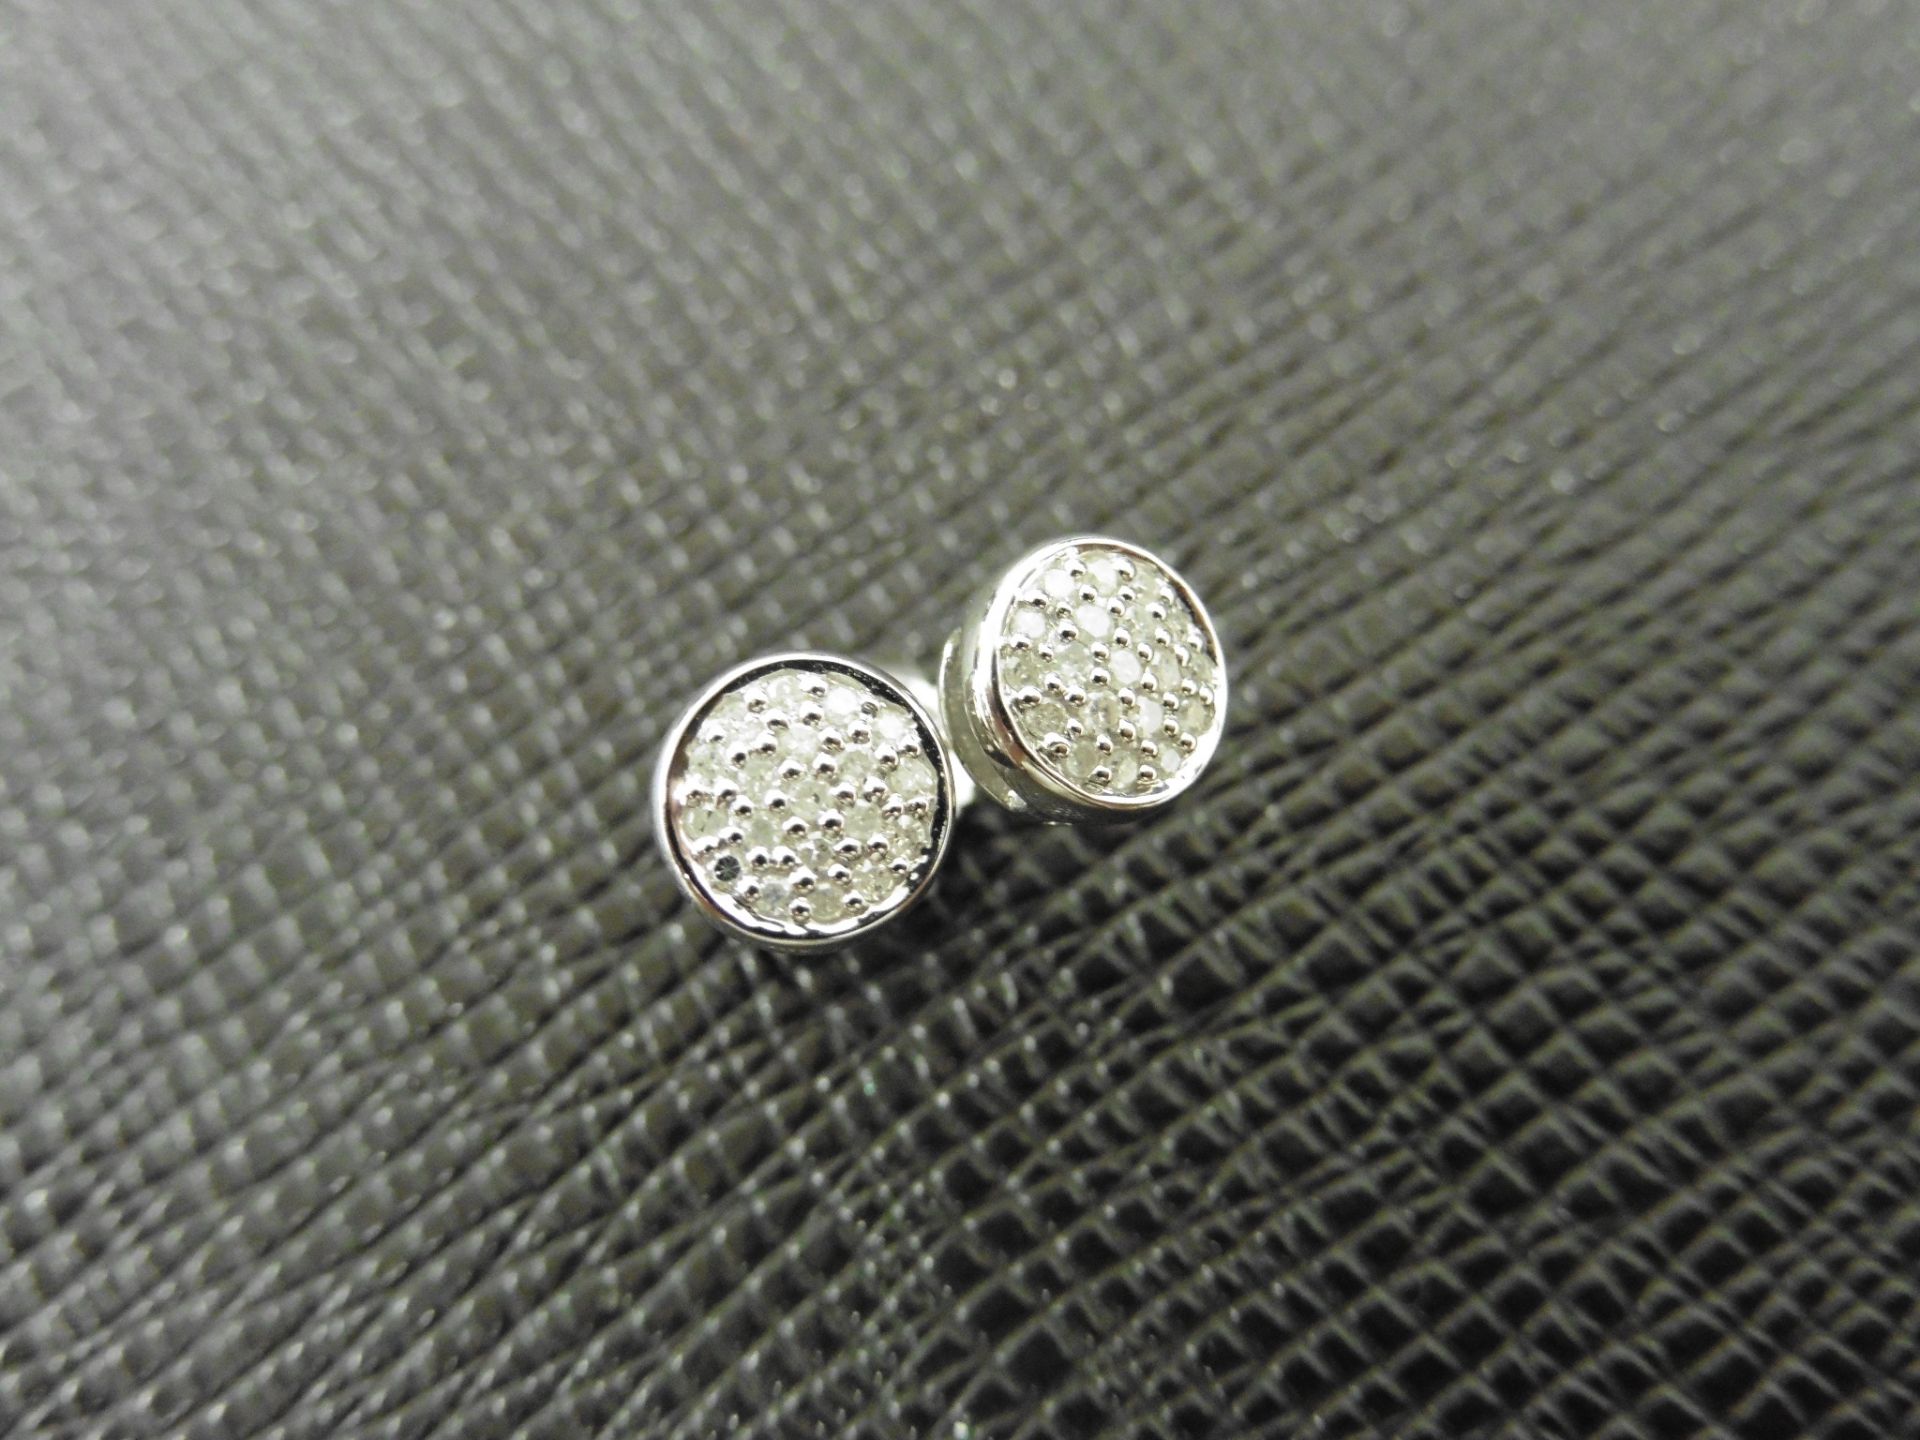 0.17ct illusion set diamond stud earrings in 9ct white gold. Small round cut diamonds, H colour - Image 2 of 3